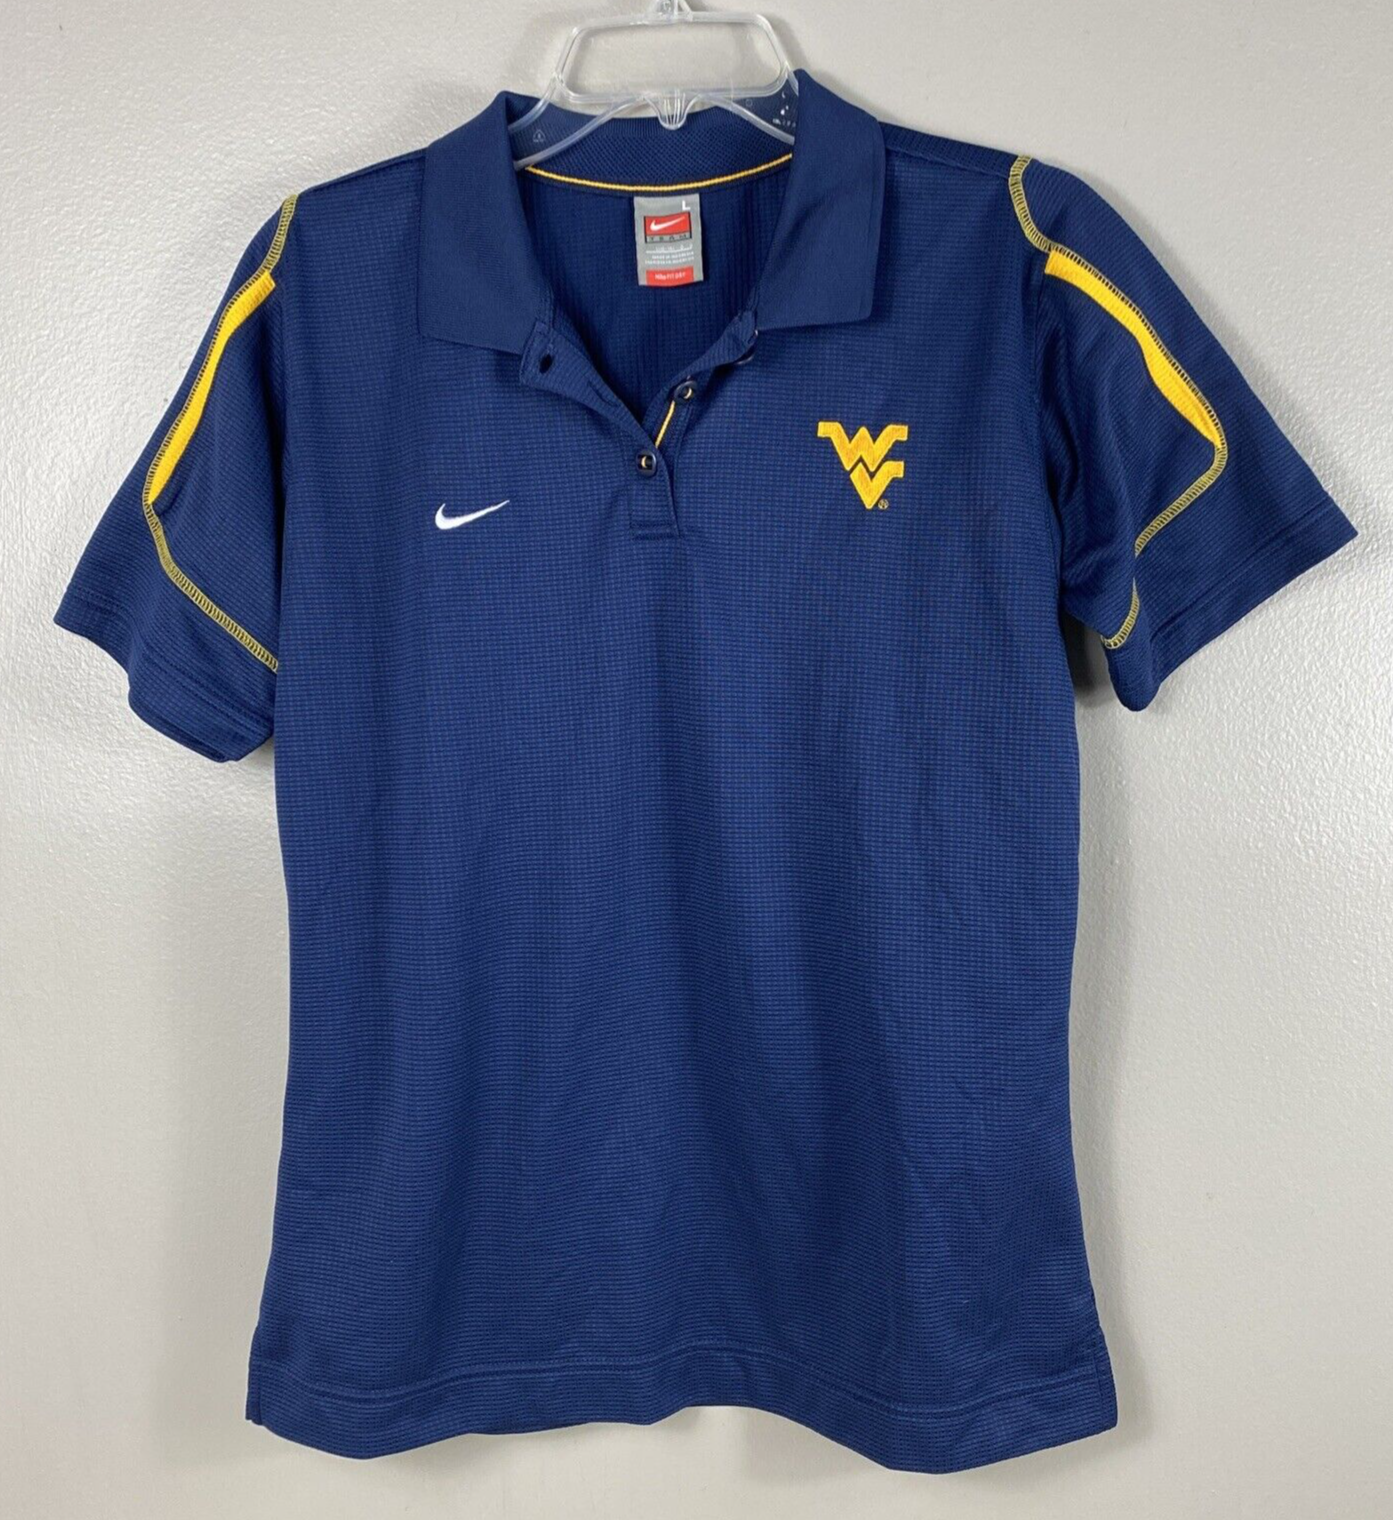 Youth's NIKE Team FitDry West Virginia Mountaineers  Polo Shirt Sz L 12-14 Blue - £14.72 GBP